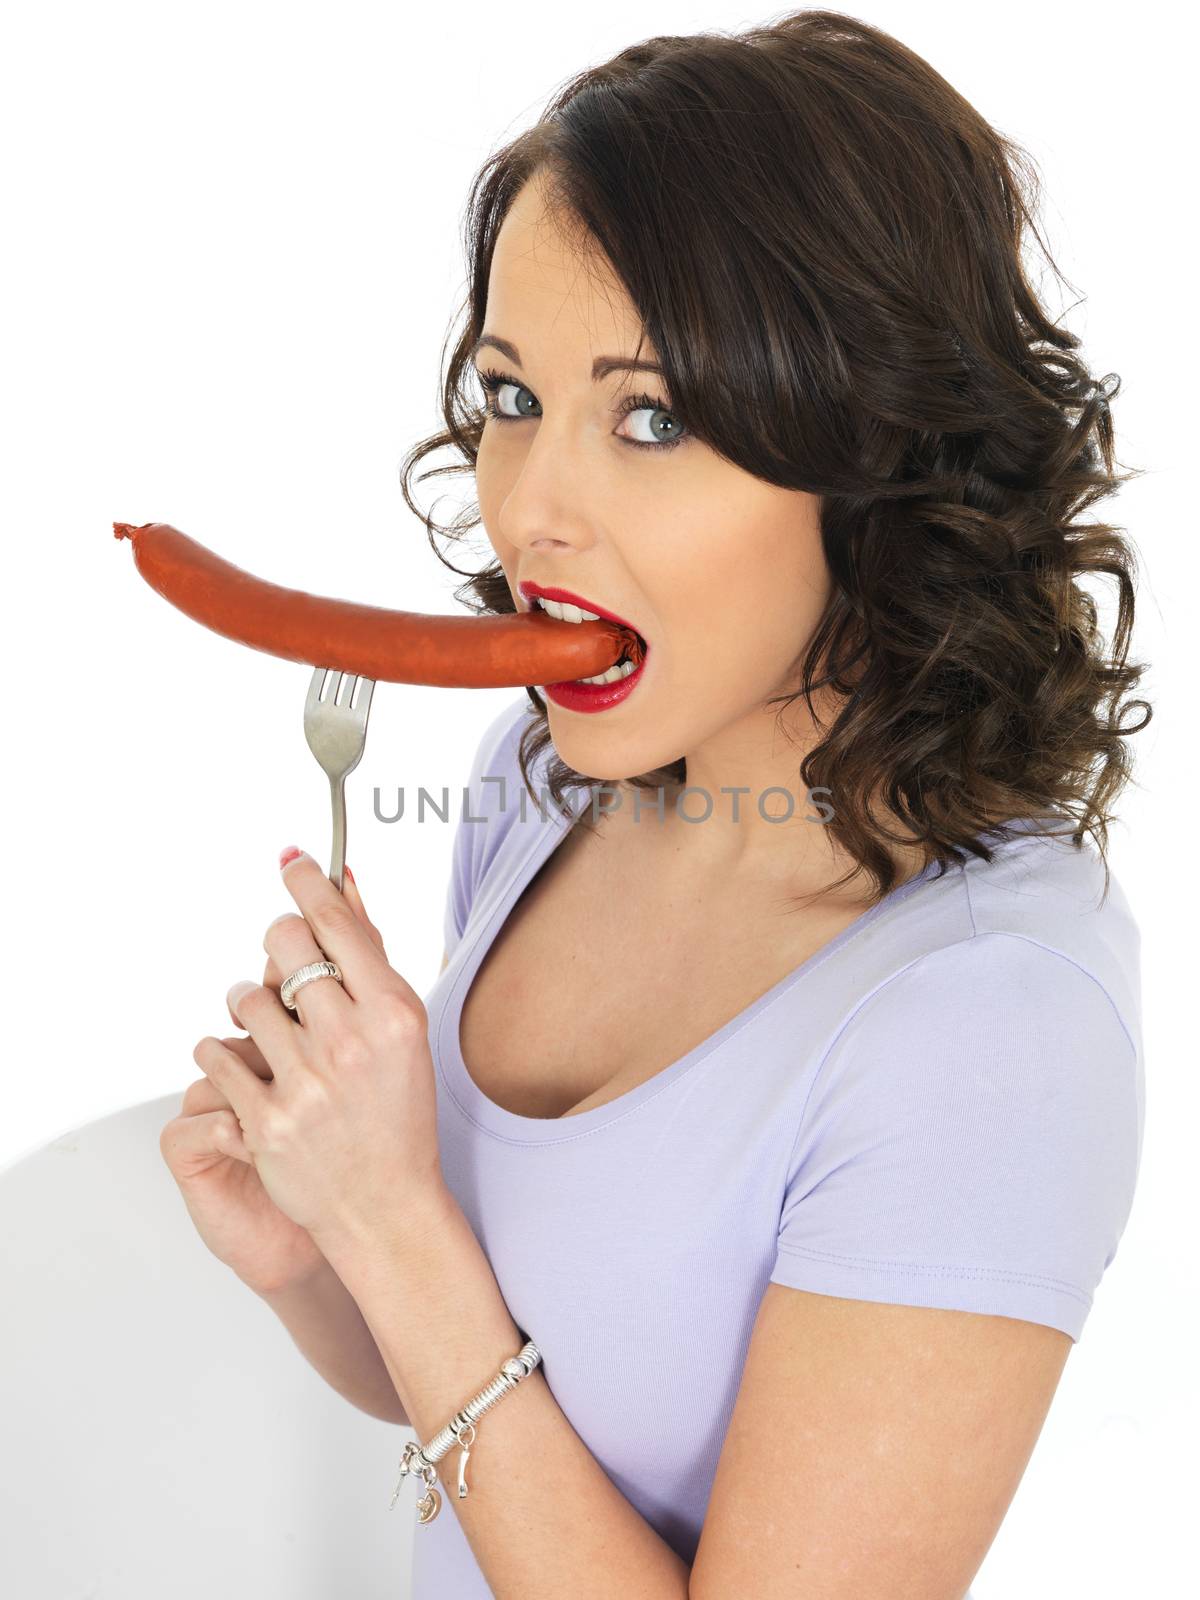 Young Woman Holding a Saveloy Sausage by Whiteboxmedia